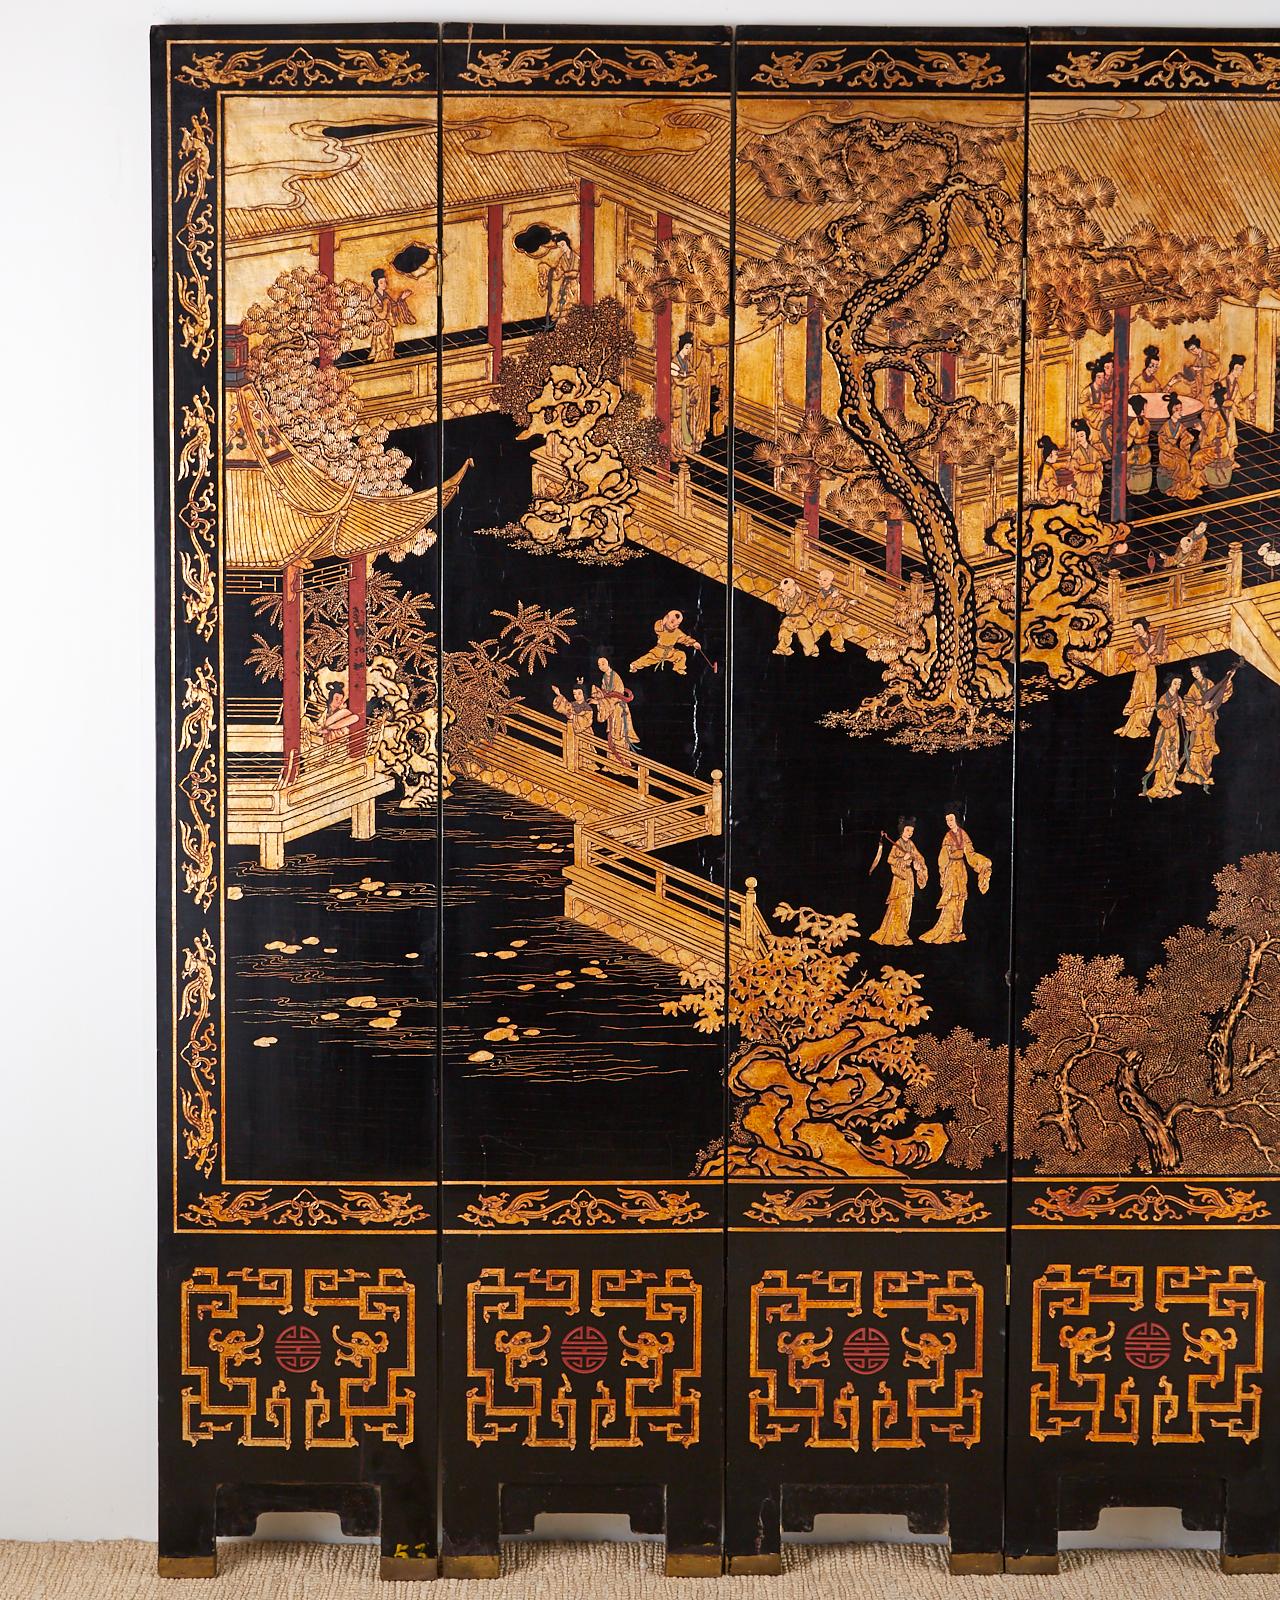 Remarkable Chinese export eight-panel Coromandel screen featuring a golden gilt courtyard palace scene with figures over black lacquer. Beautifully incised thick lacquer with intricate details. Each panel has a red shou symbol on the bottom